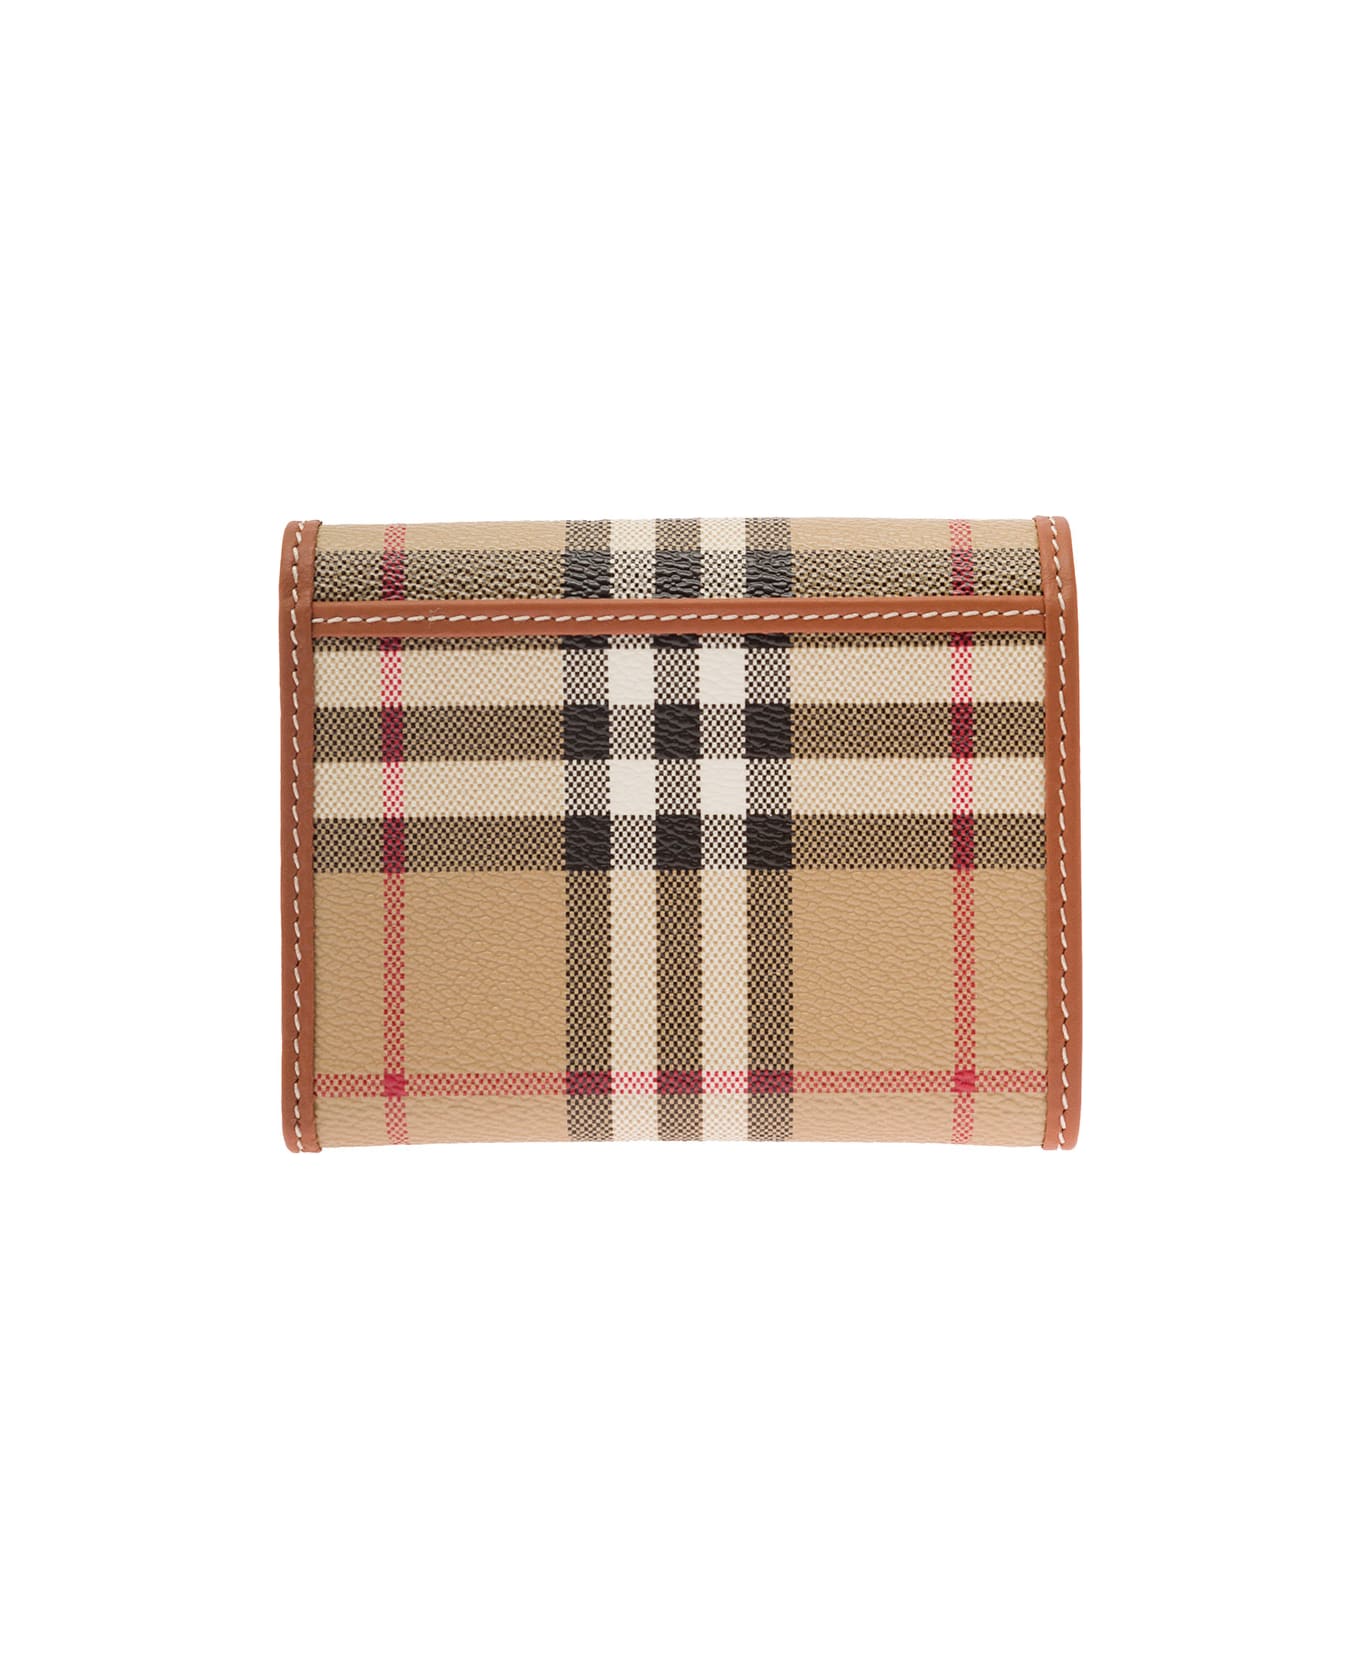 Burberry Small Folding Wallet With Checkered Motif In Leather Woman - Beige